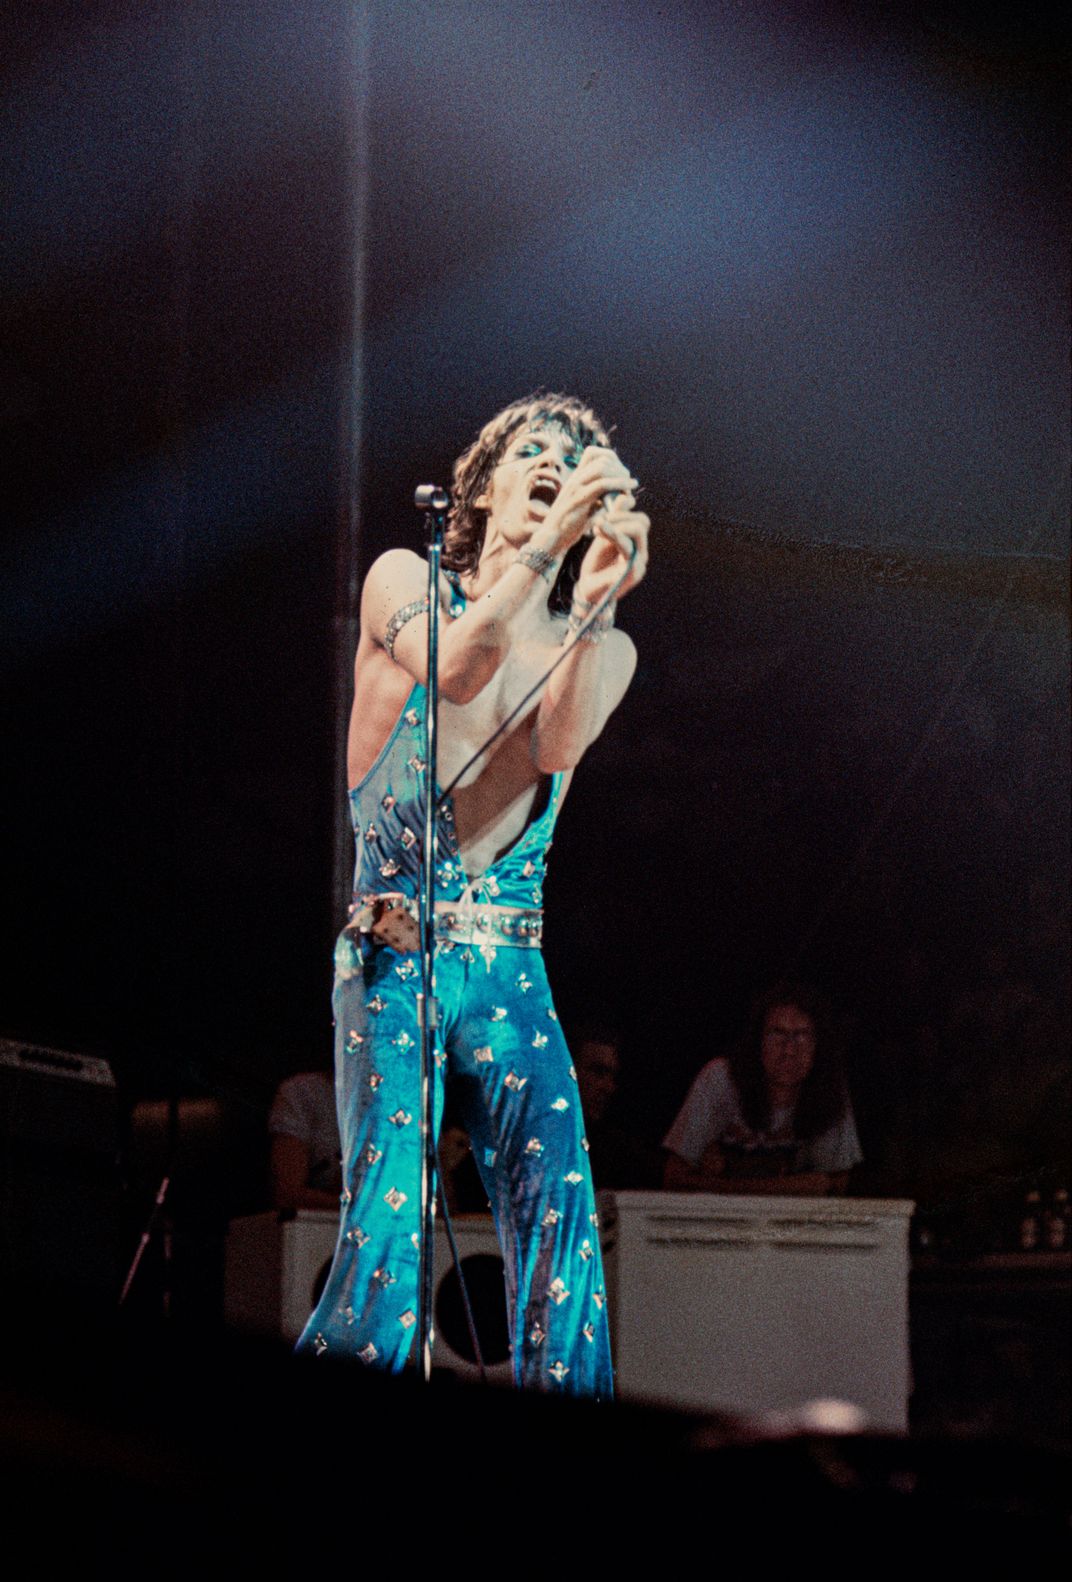 Mick Jagger onstage, early 70s